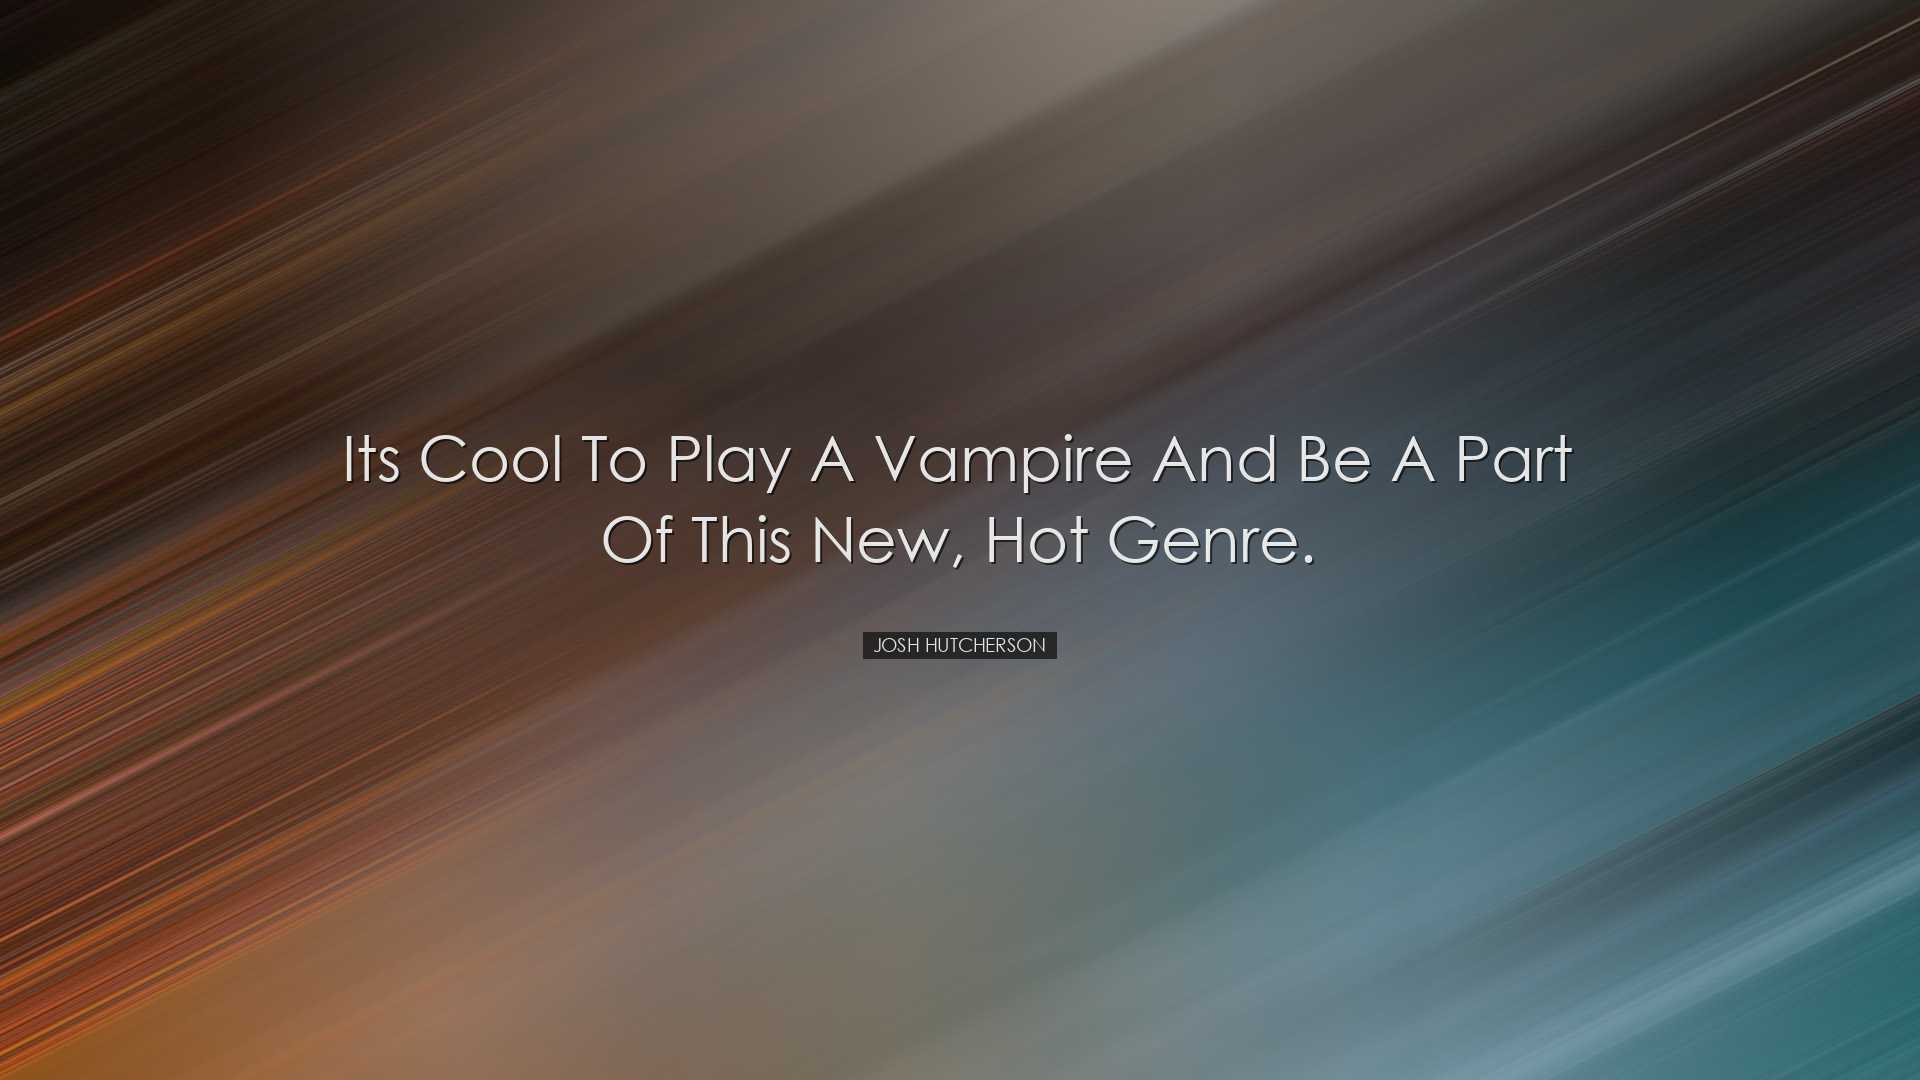 Its cool to play a vampire and be a part of this new, hot genre. -